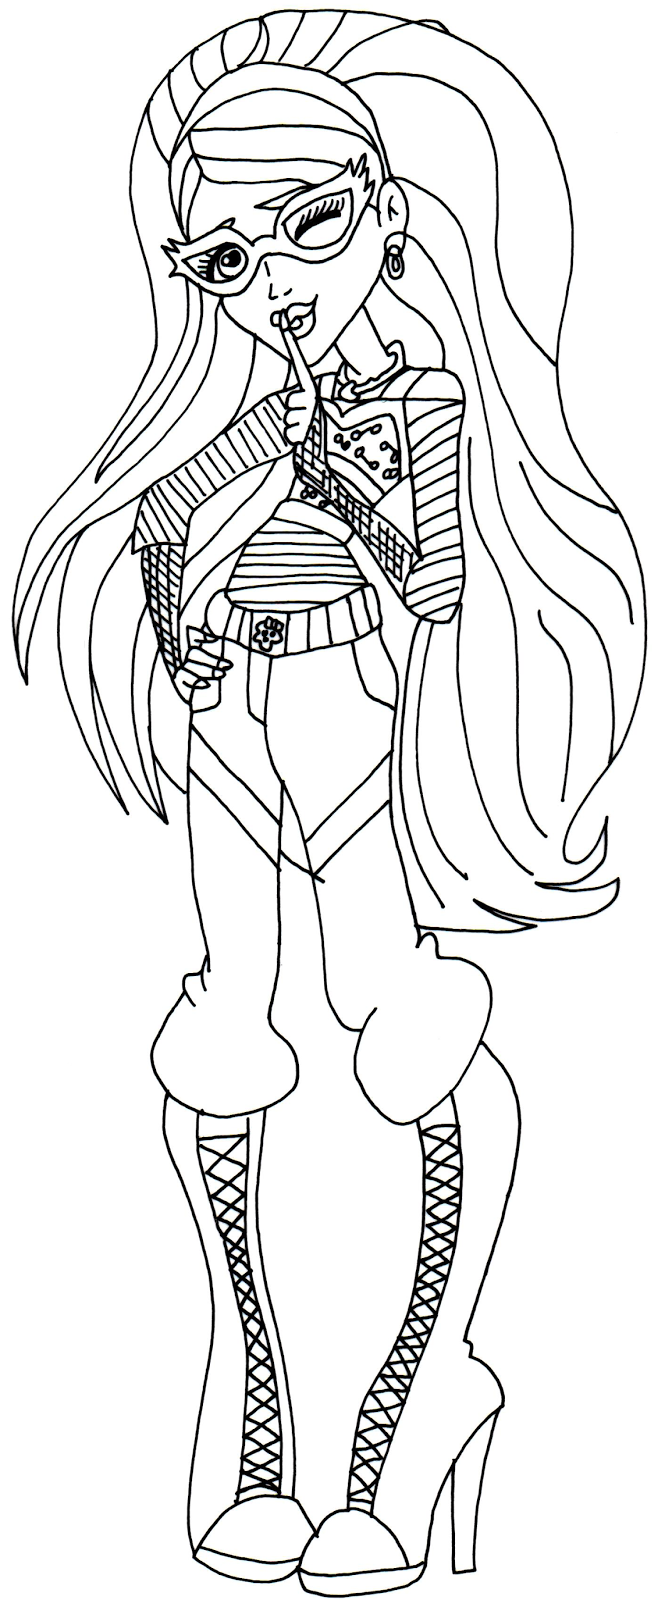 Download Free Printable Monster High Coloring Pages: Ghoulia Yelps ...